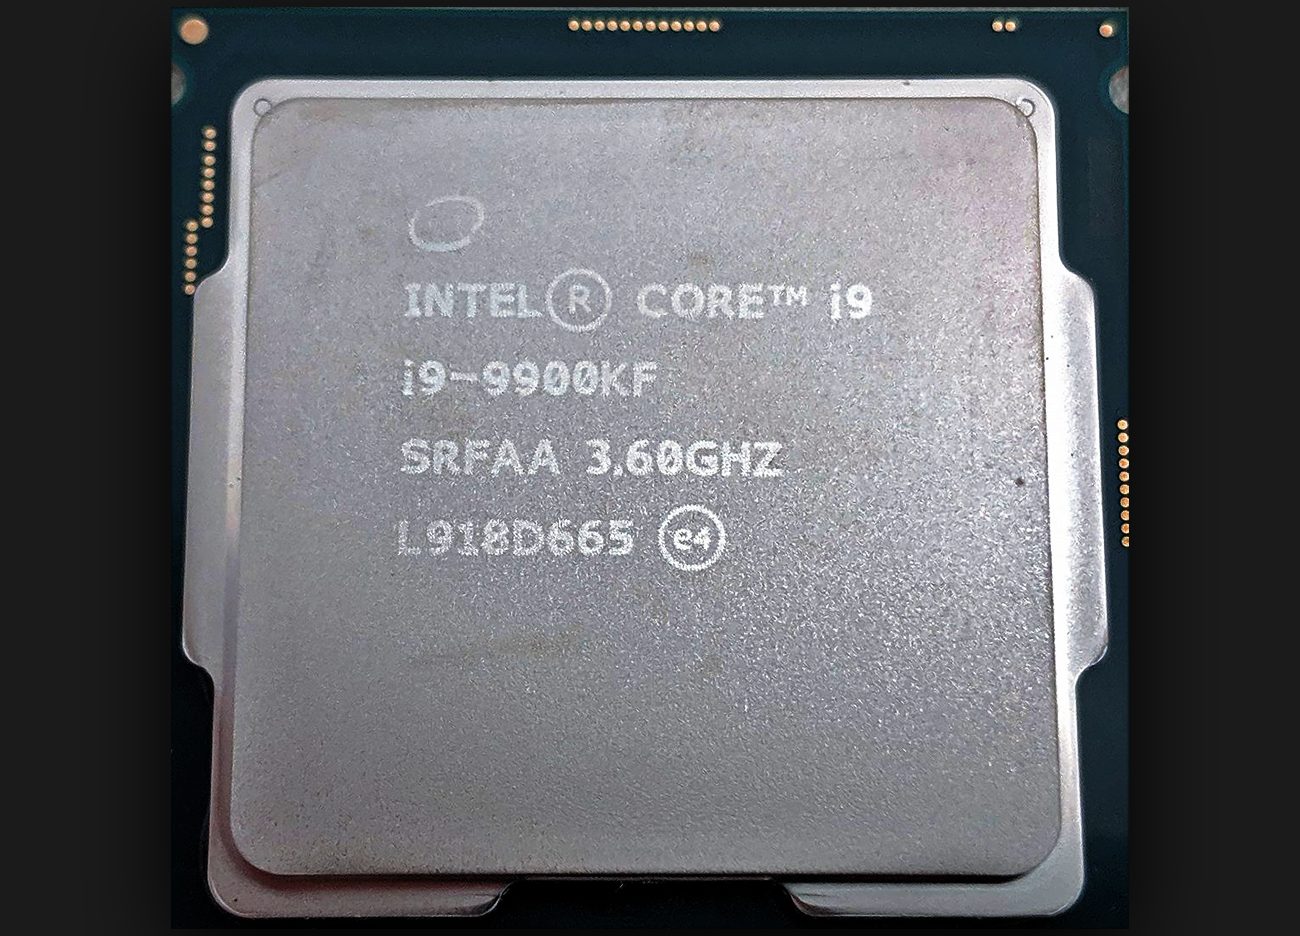 Intel Core i9 9900KF CPU Review - Page 6 of 13 - The FPS Review